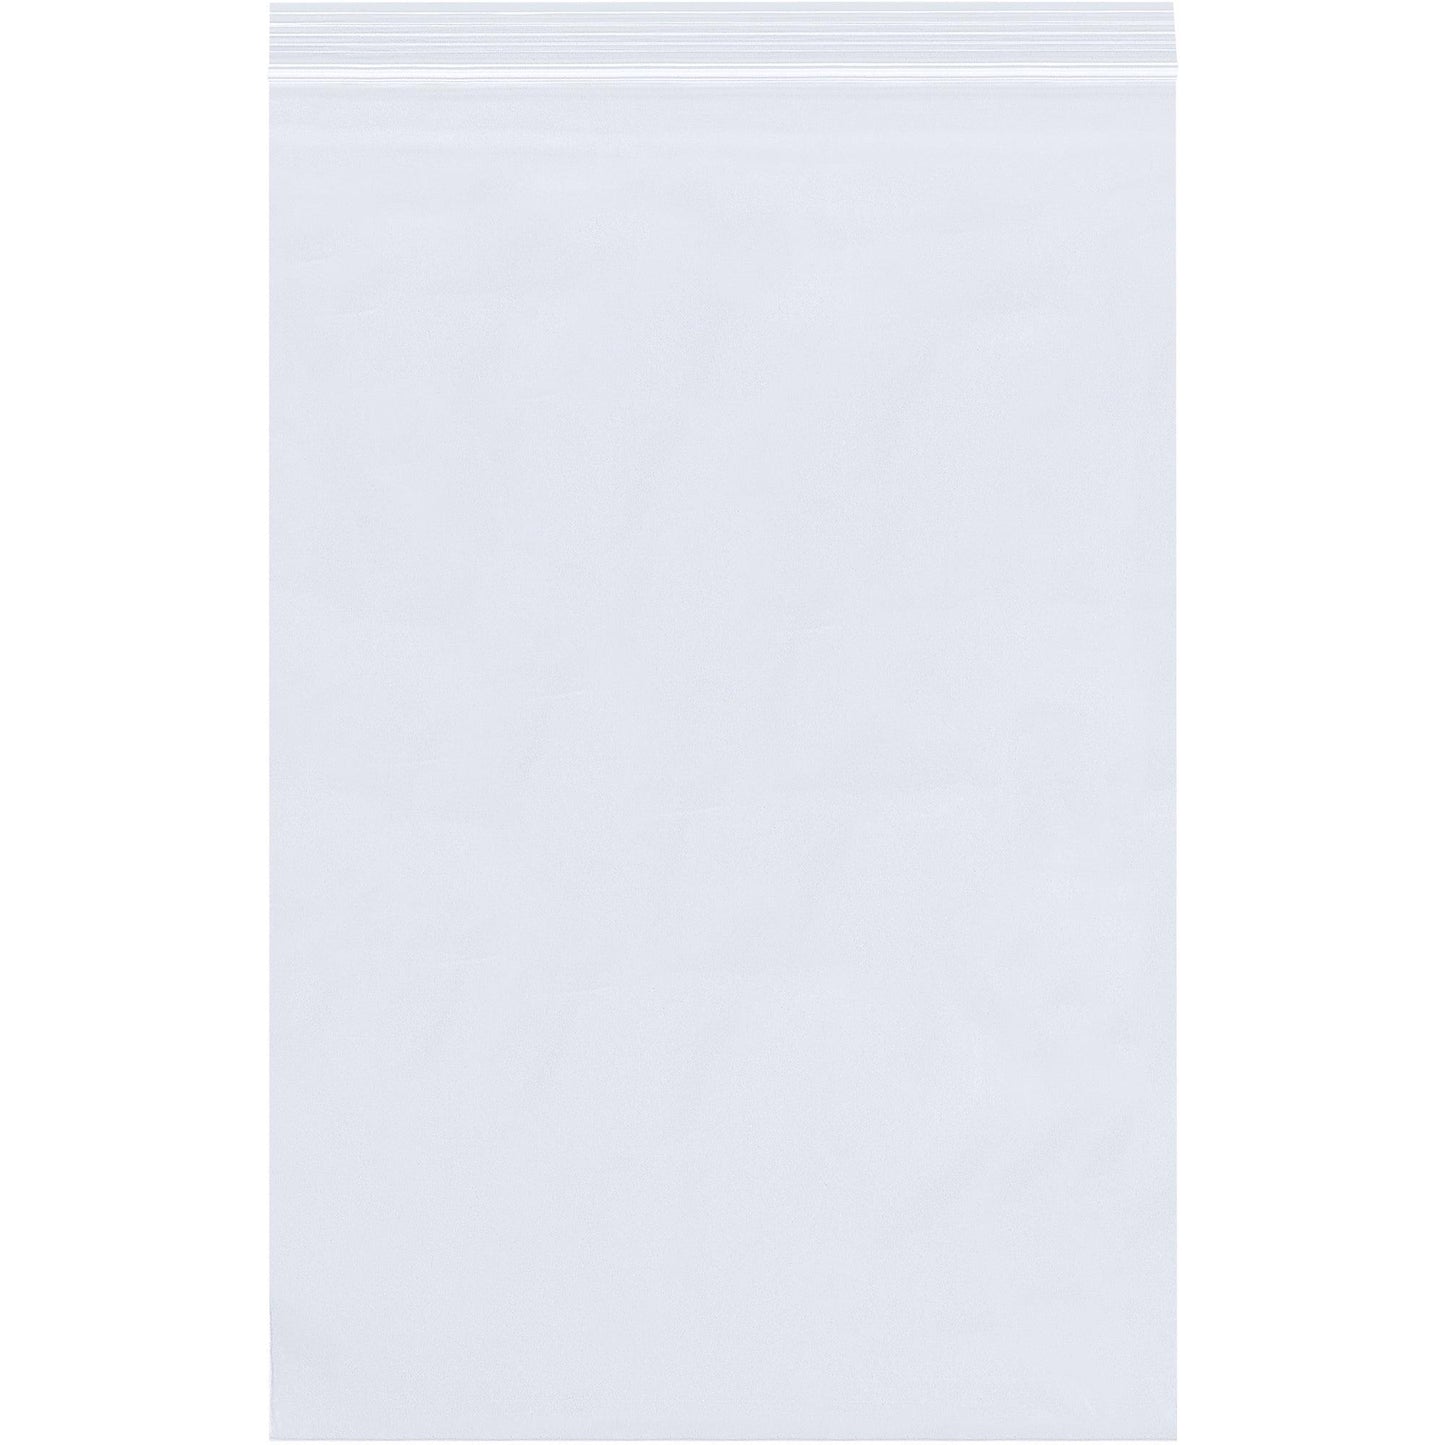 2 x 2" - 2 Mil Reclosable Poly Bags - PB3520